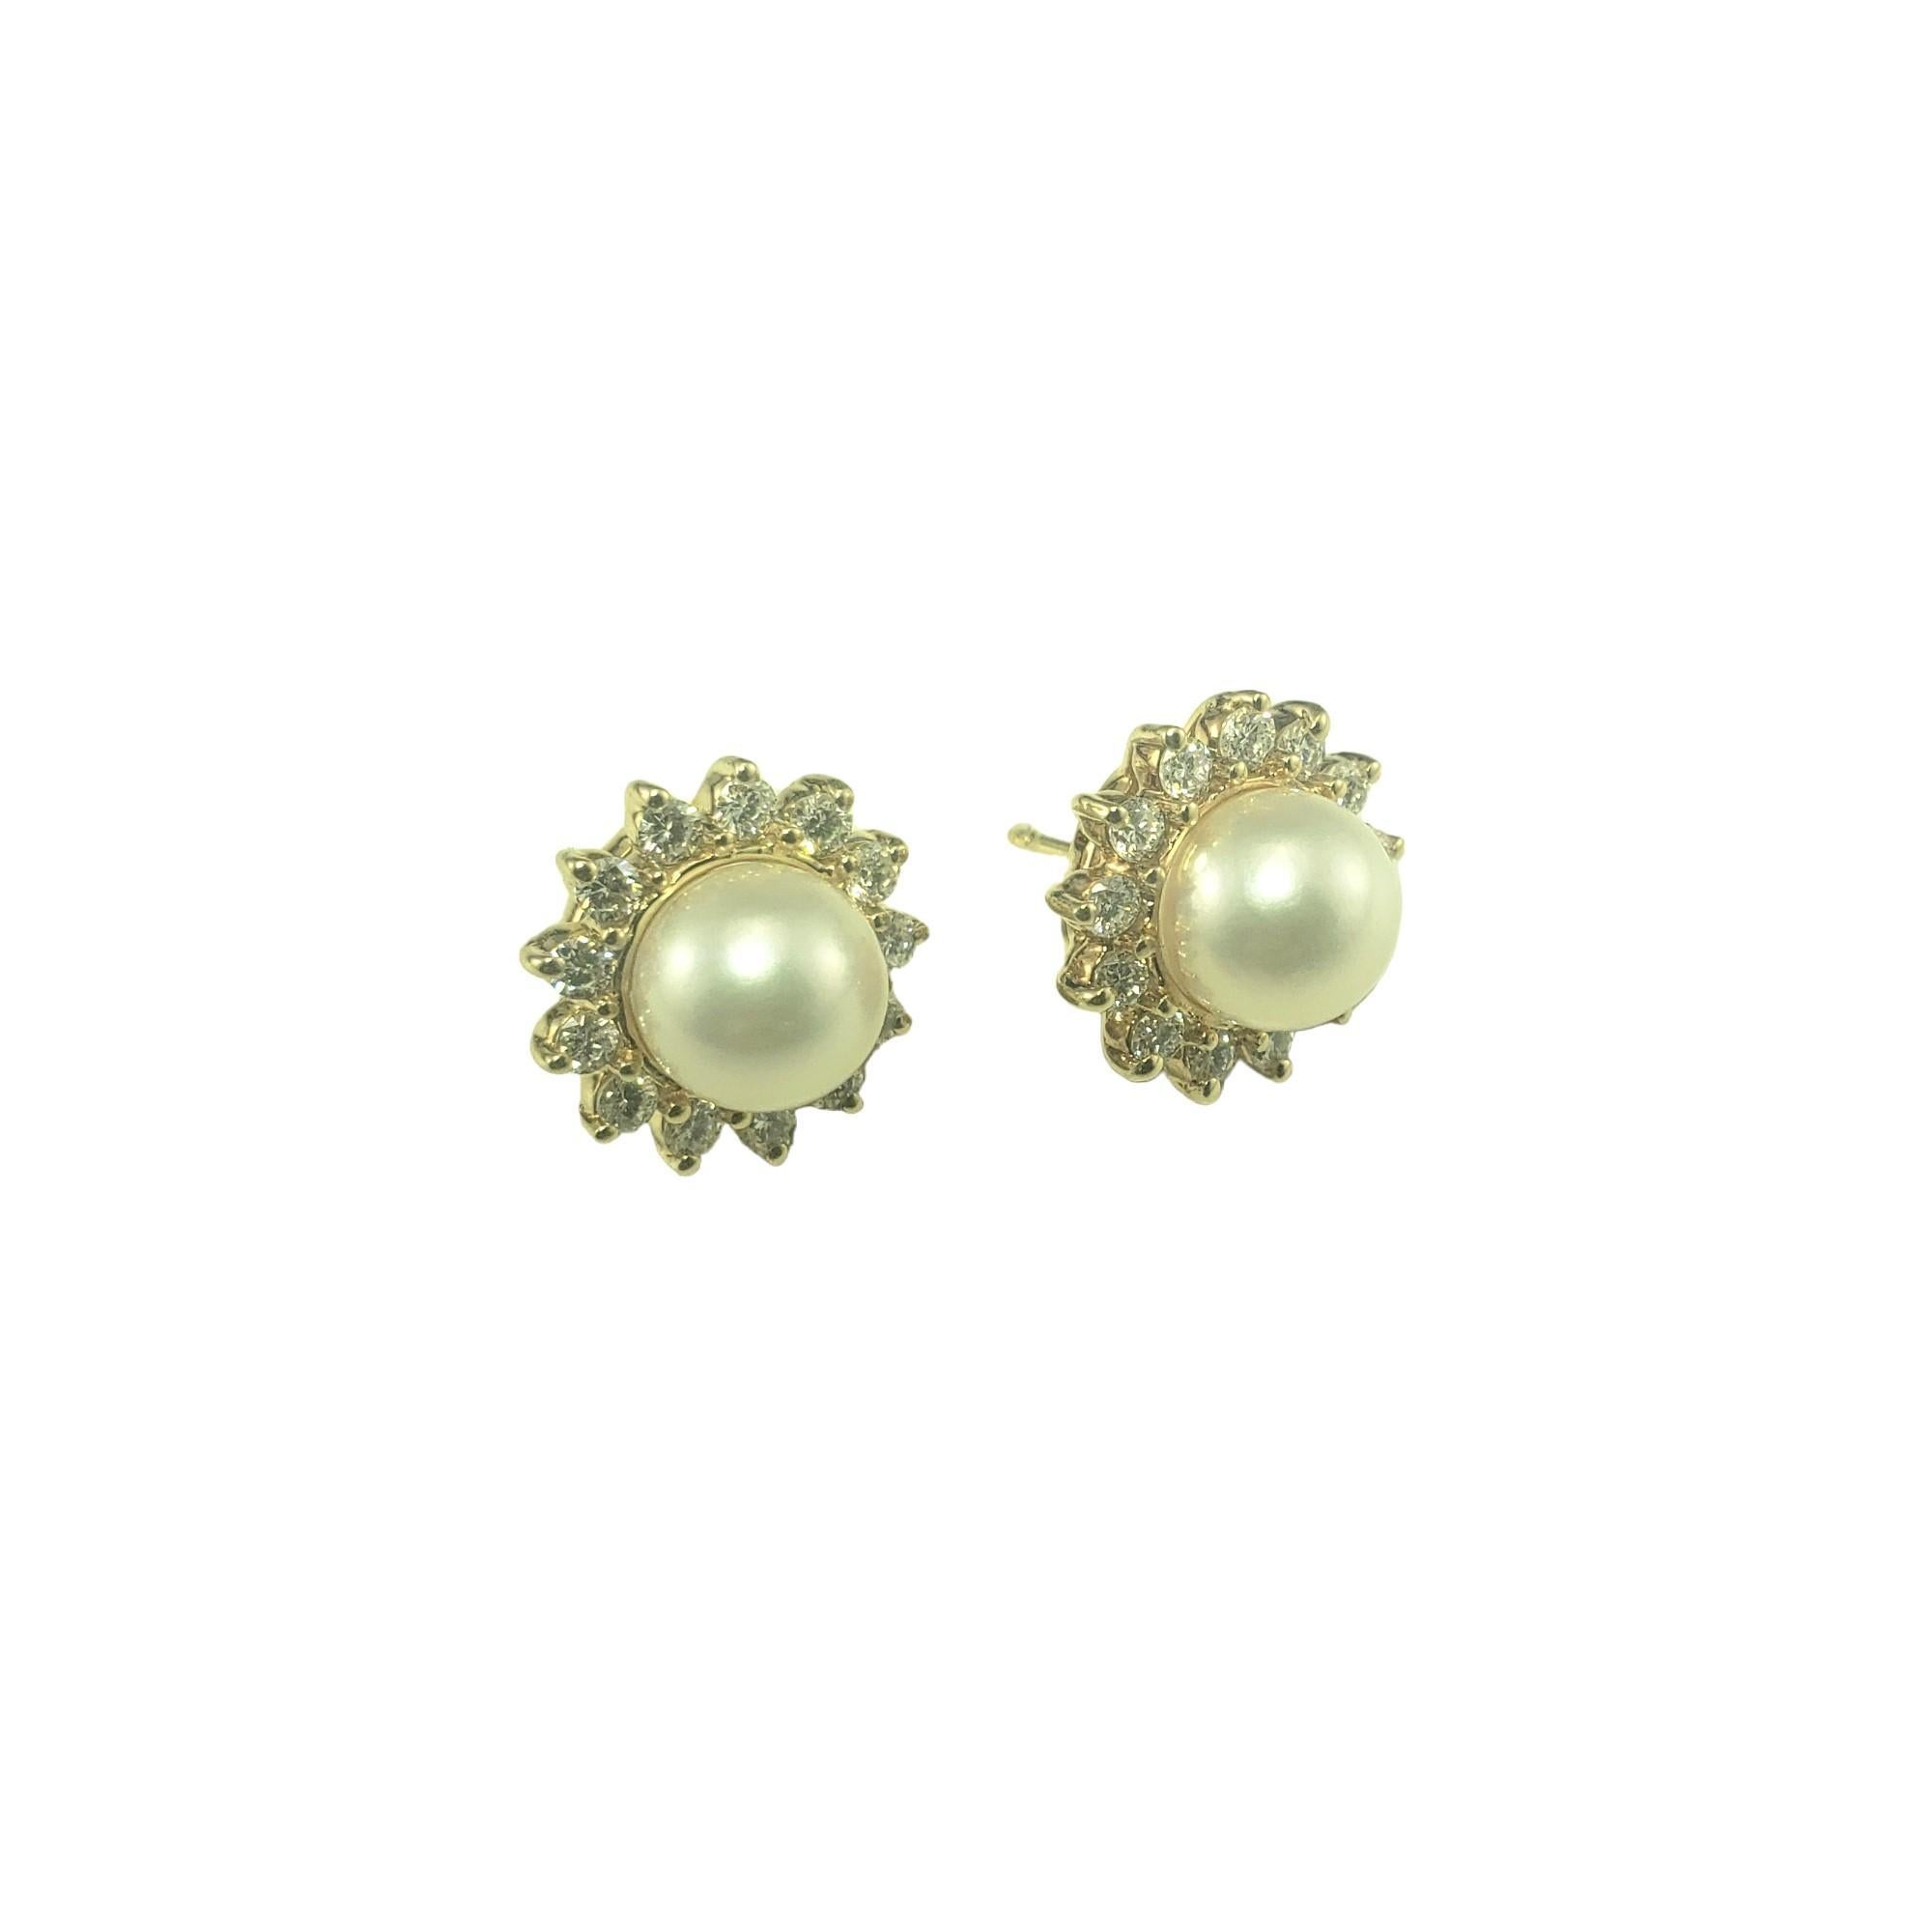 14 Karat Yellow Gold Pearl and Diamond Earrings #16709 In Good Condition For Sale In Washington Depot, CT